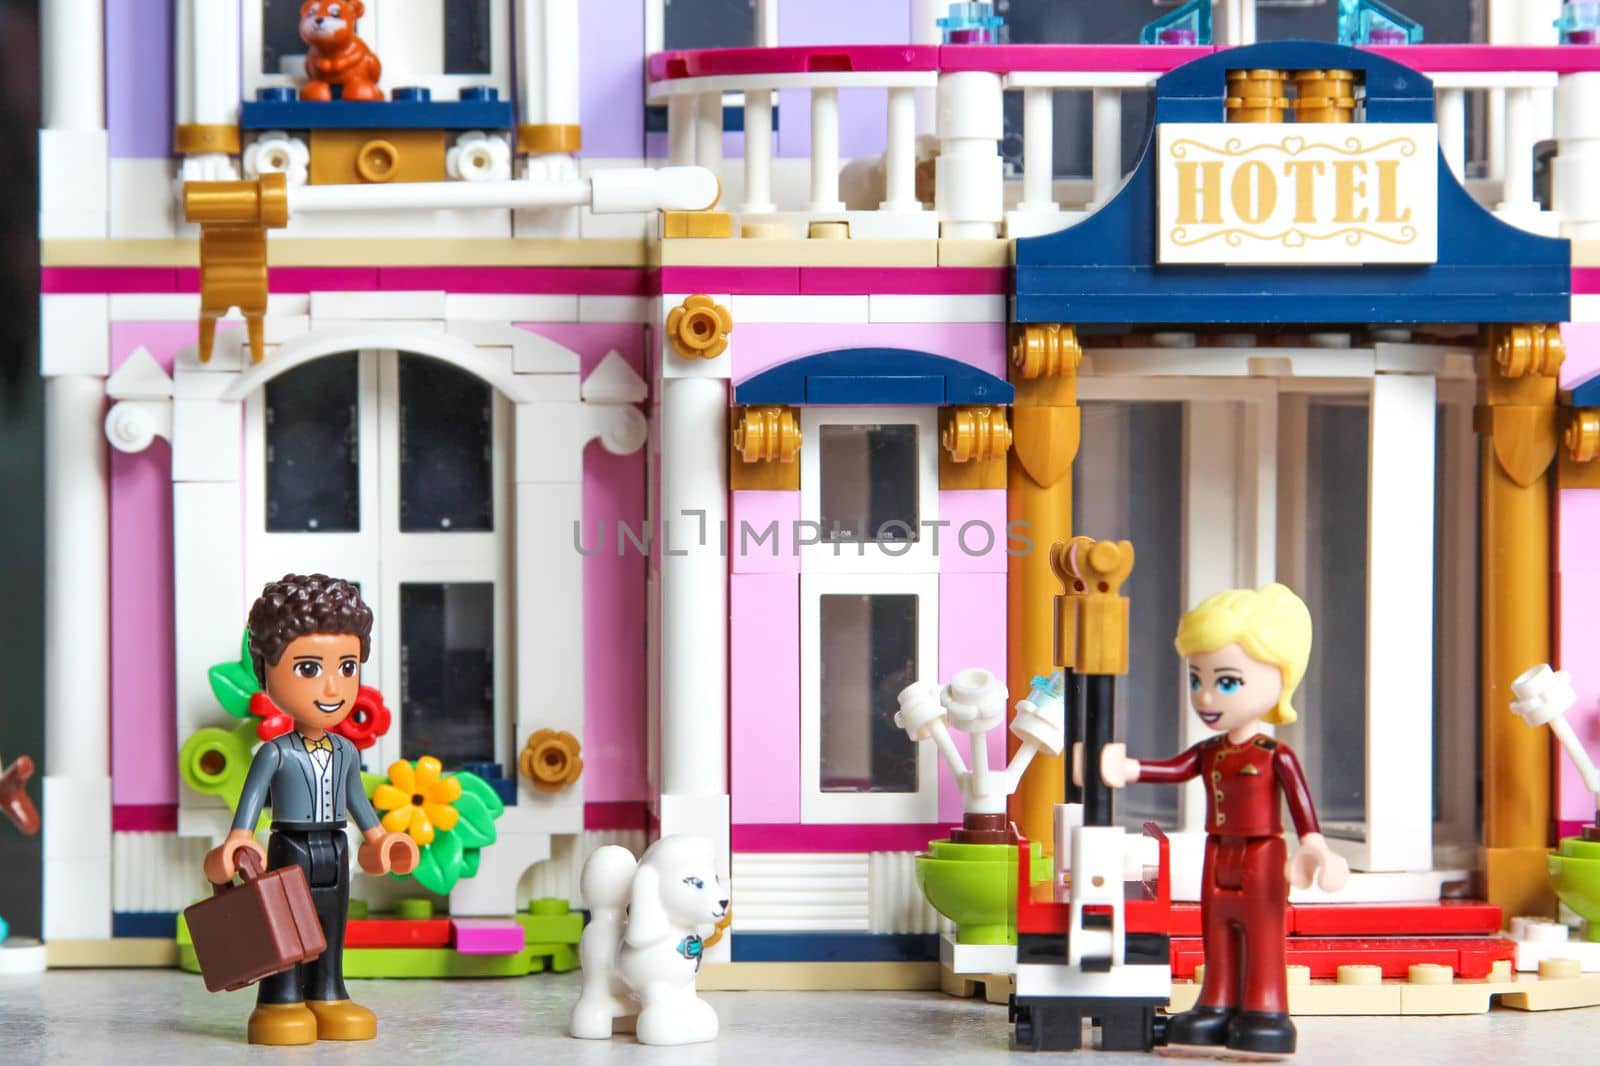 Moscow, Russian Federation - March 14, 2022. Lego mini figures are manufactured by Lego Group. The visitor arrived at the hotel. The guest is met by a porter on the street. Studio shot.